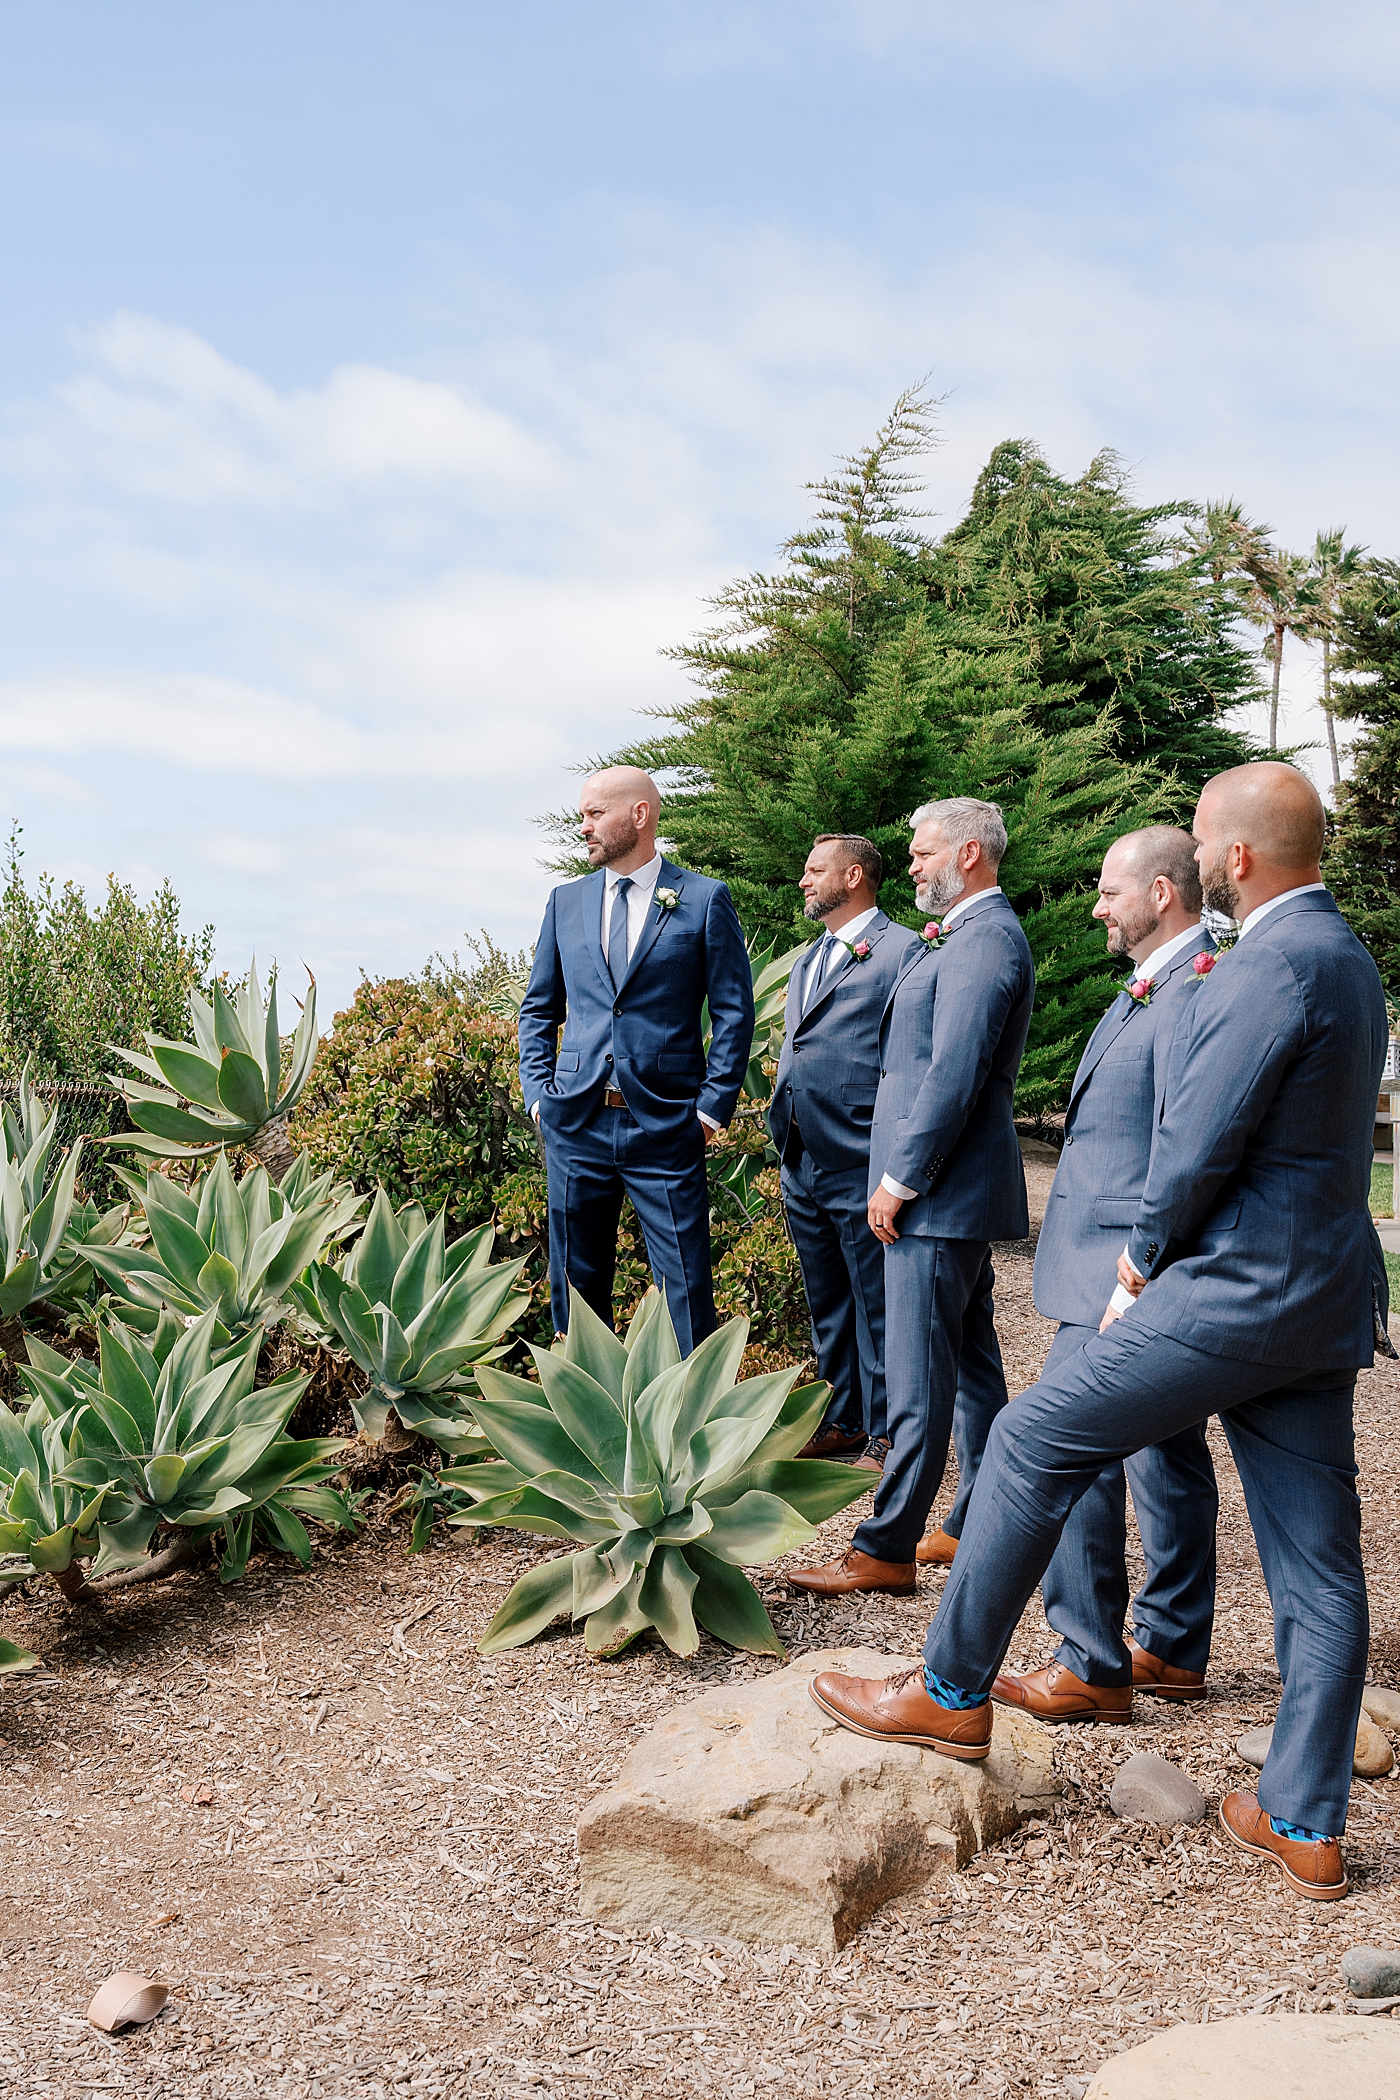 Groom and groomsmen in navy suits posed in nature looking out at the ocean | Image by Hope Helmuth Photography